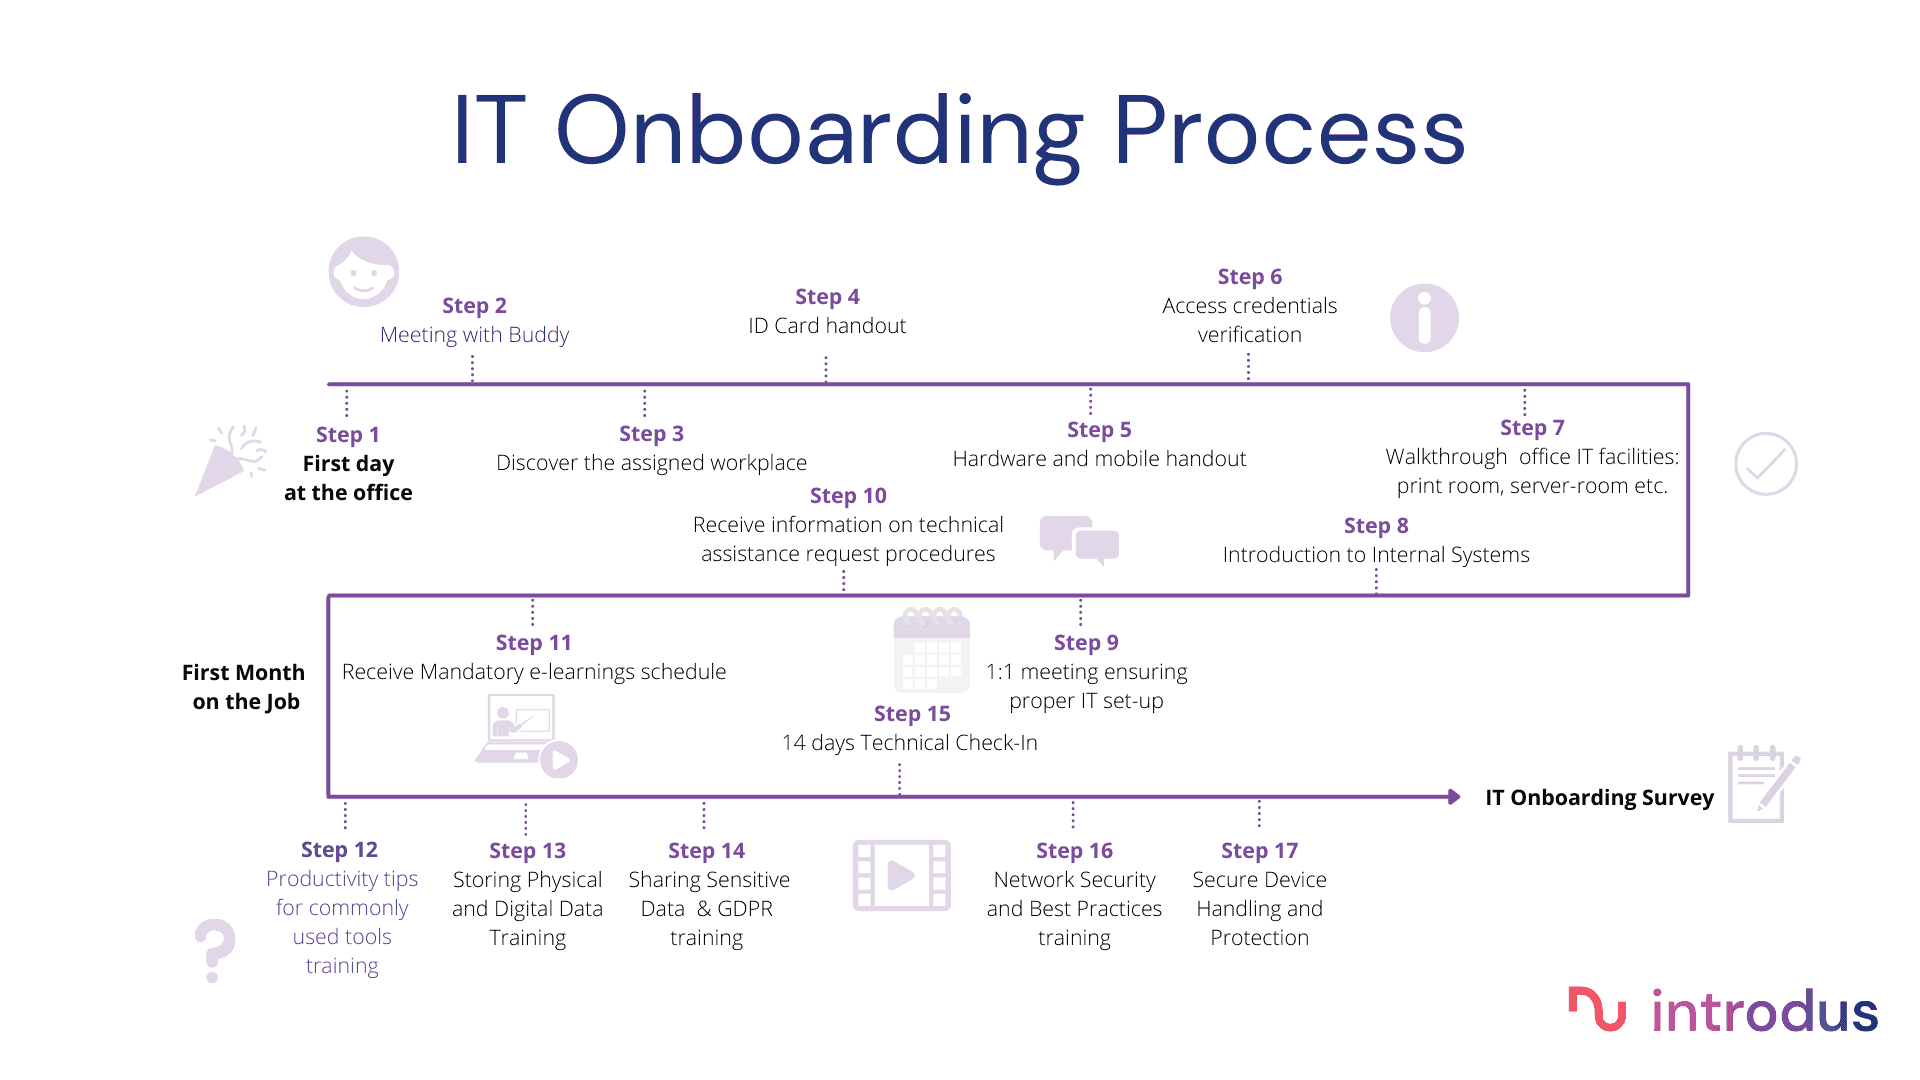 IT Onboarding: Checklist and Tips for Ensuring a Smooth Process